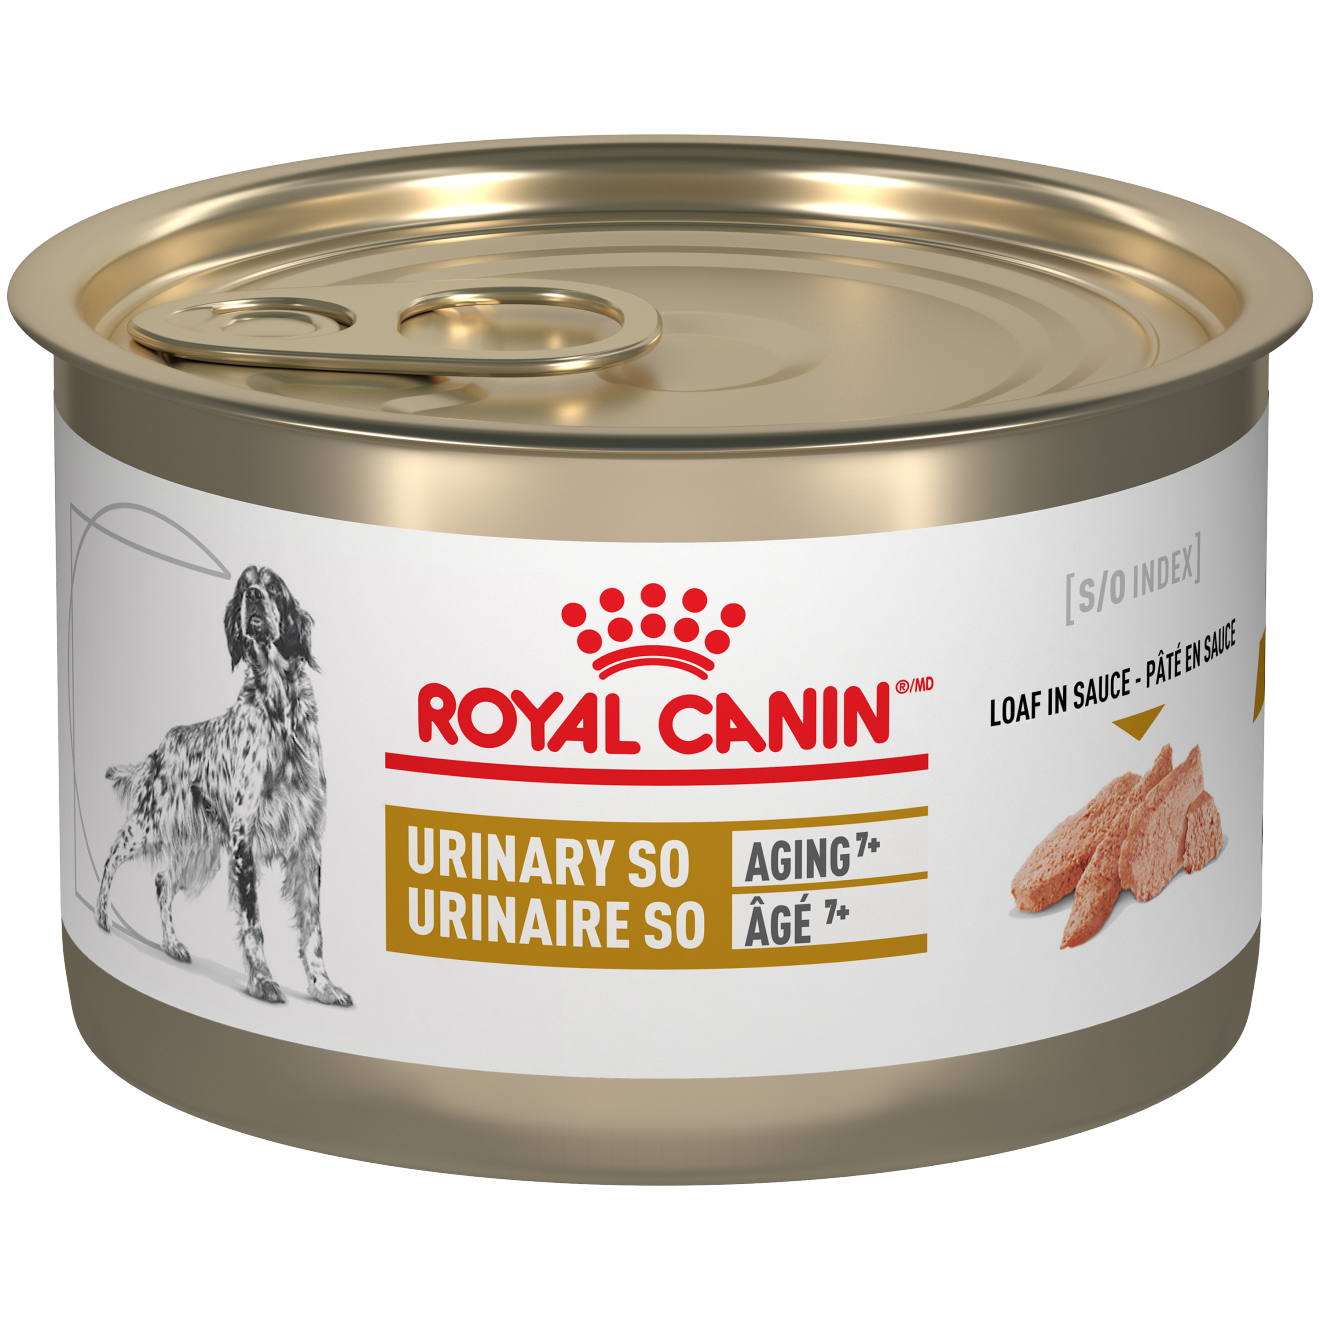 Canine Urinary SO® Aging 7+ loaf in sauce